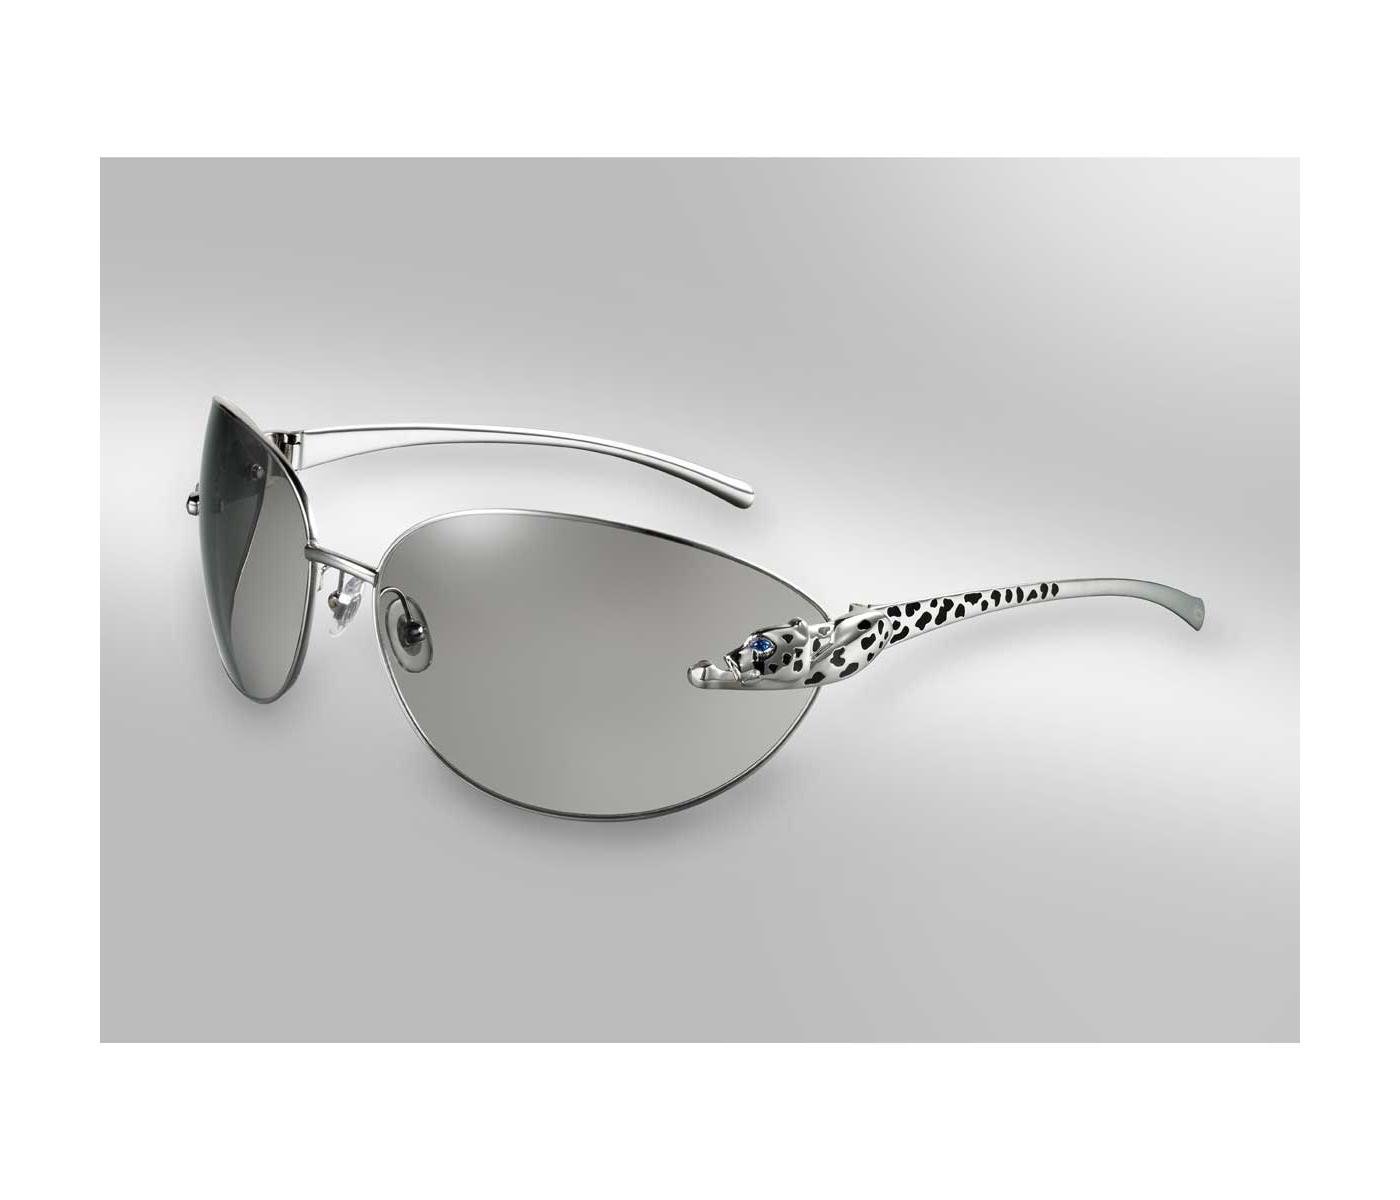 Sunglasses by Cartier